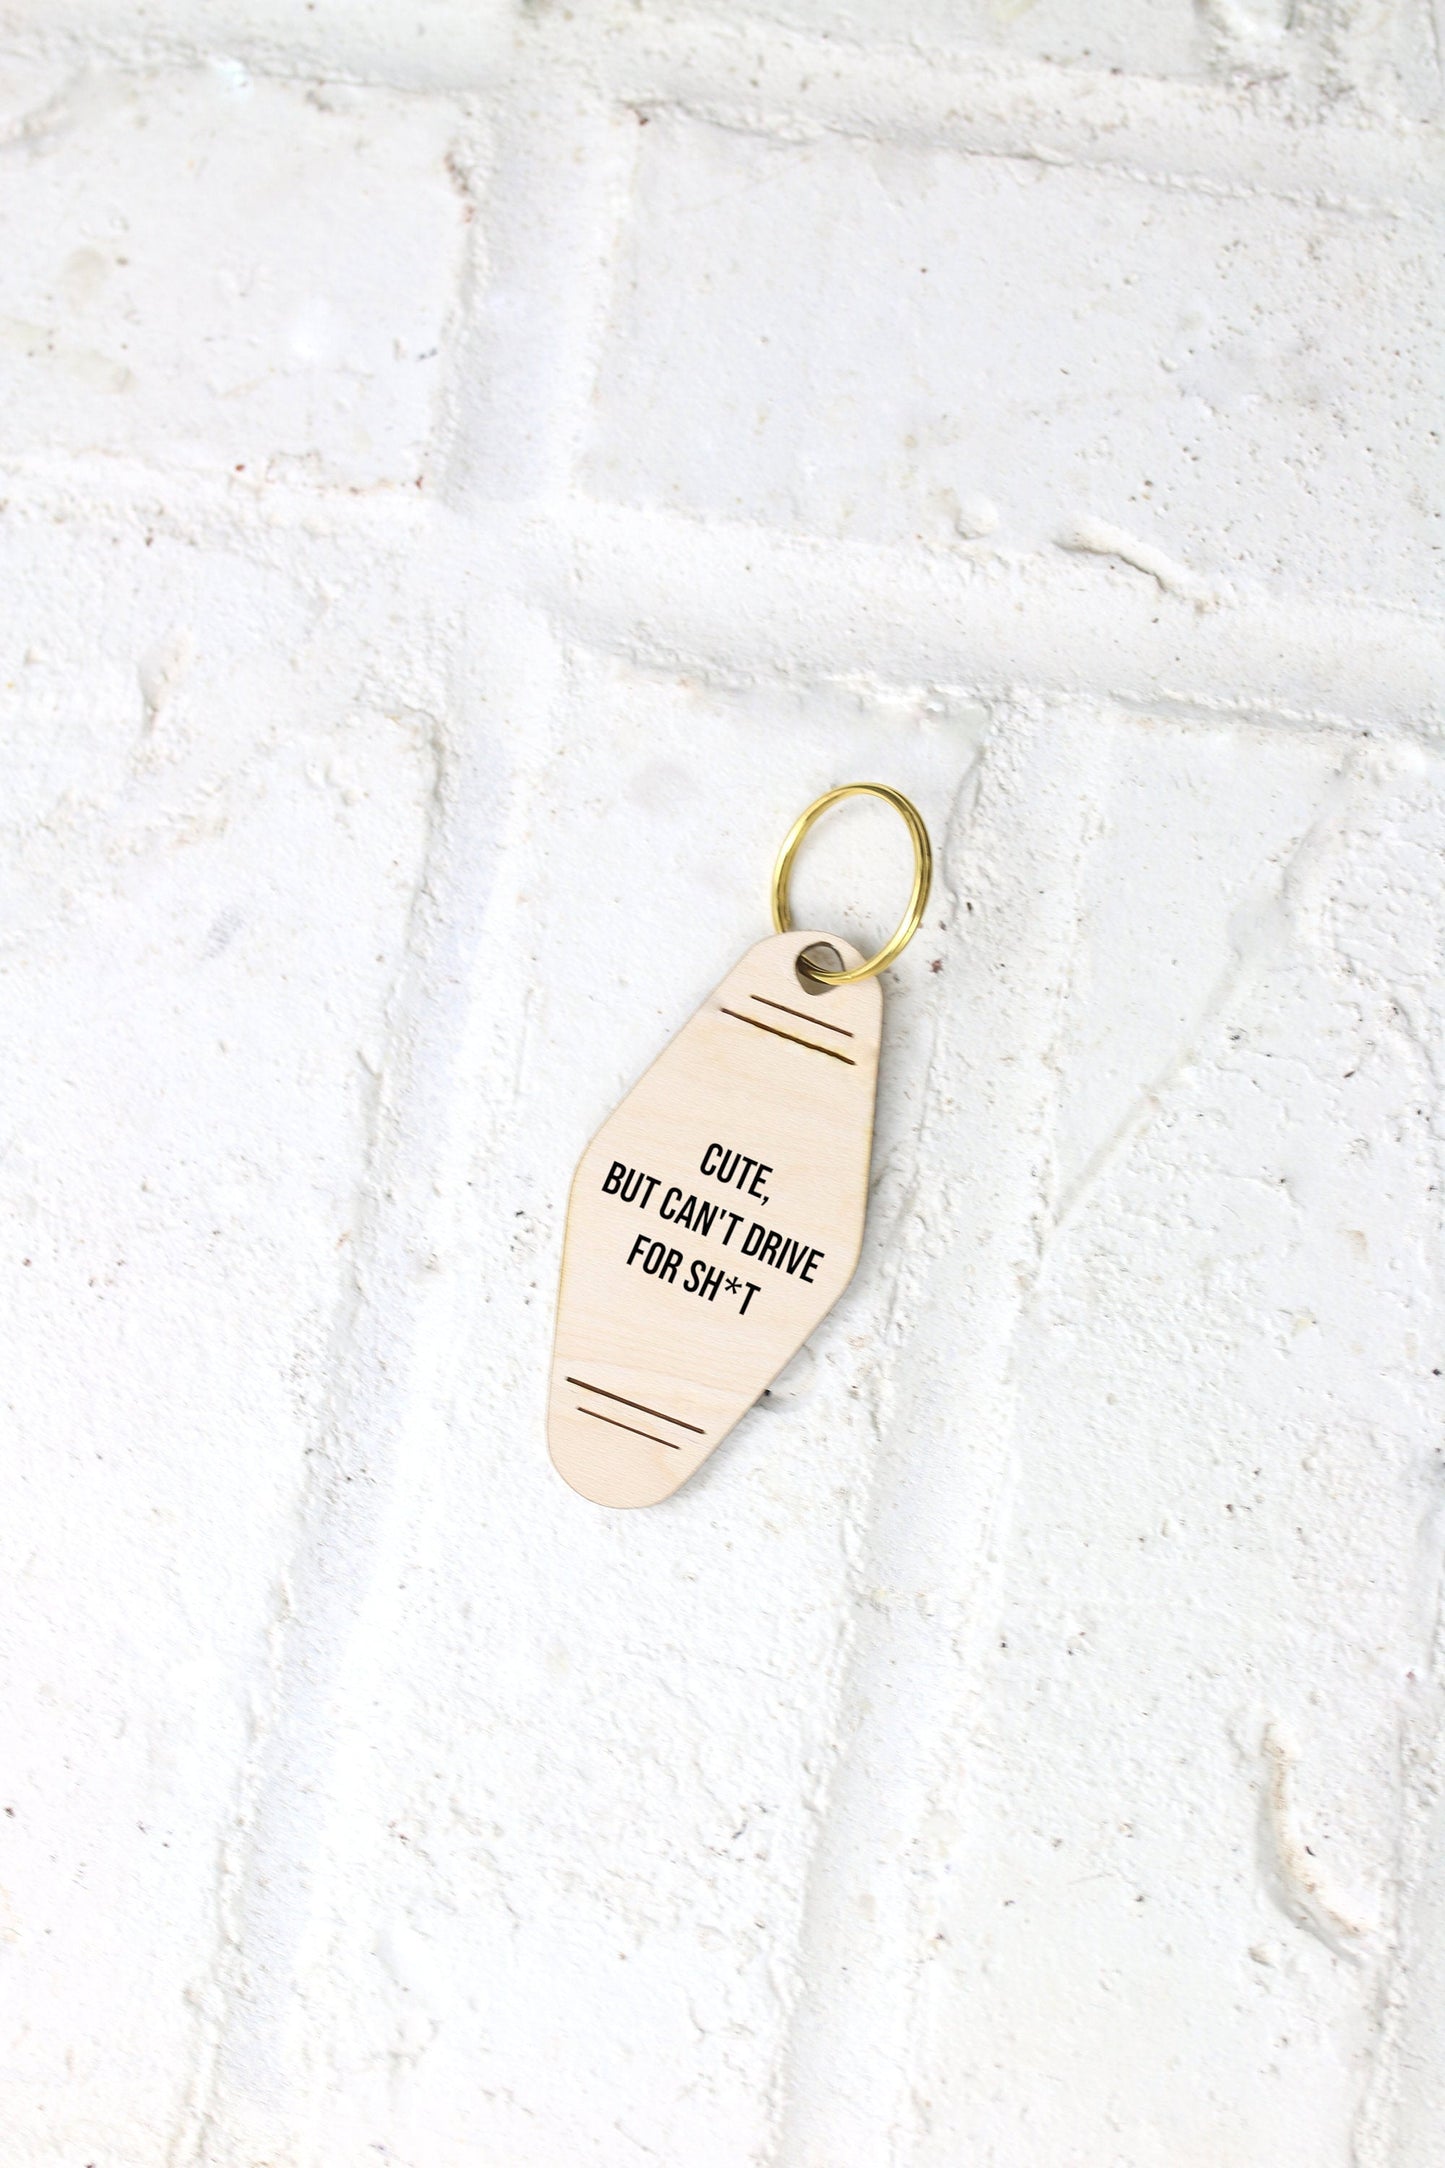 Funny Keychain, Cute But Can't Drive For Shit Engraved Wood Motel Keychain, Wood Key Fob, Gift For Her